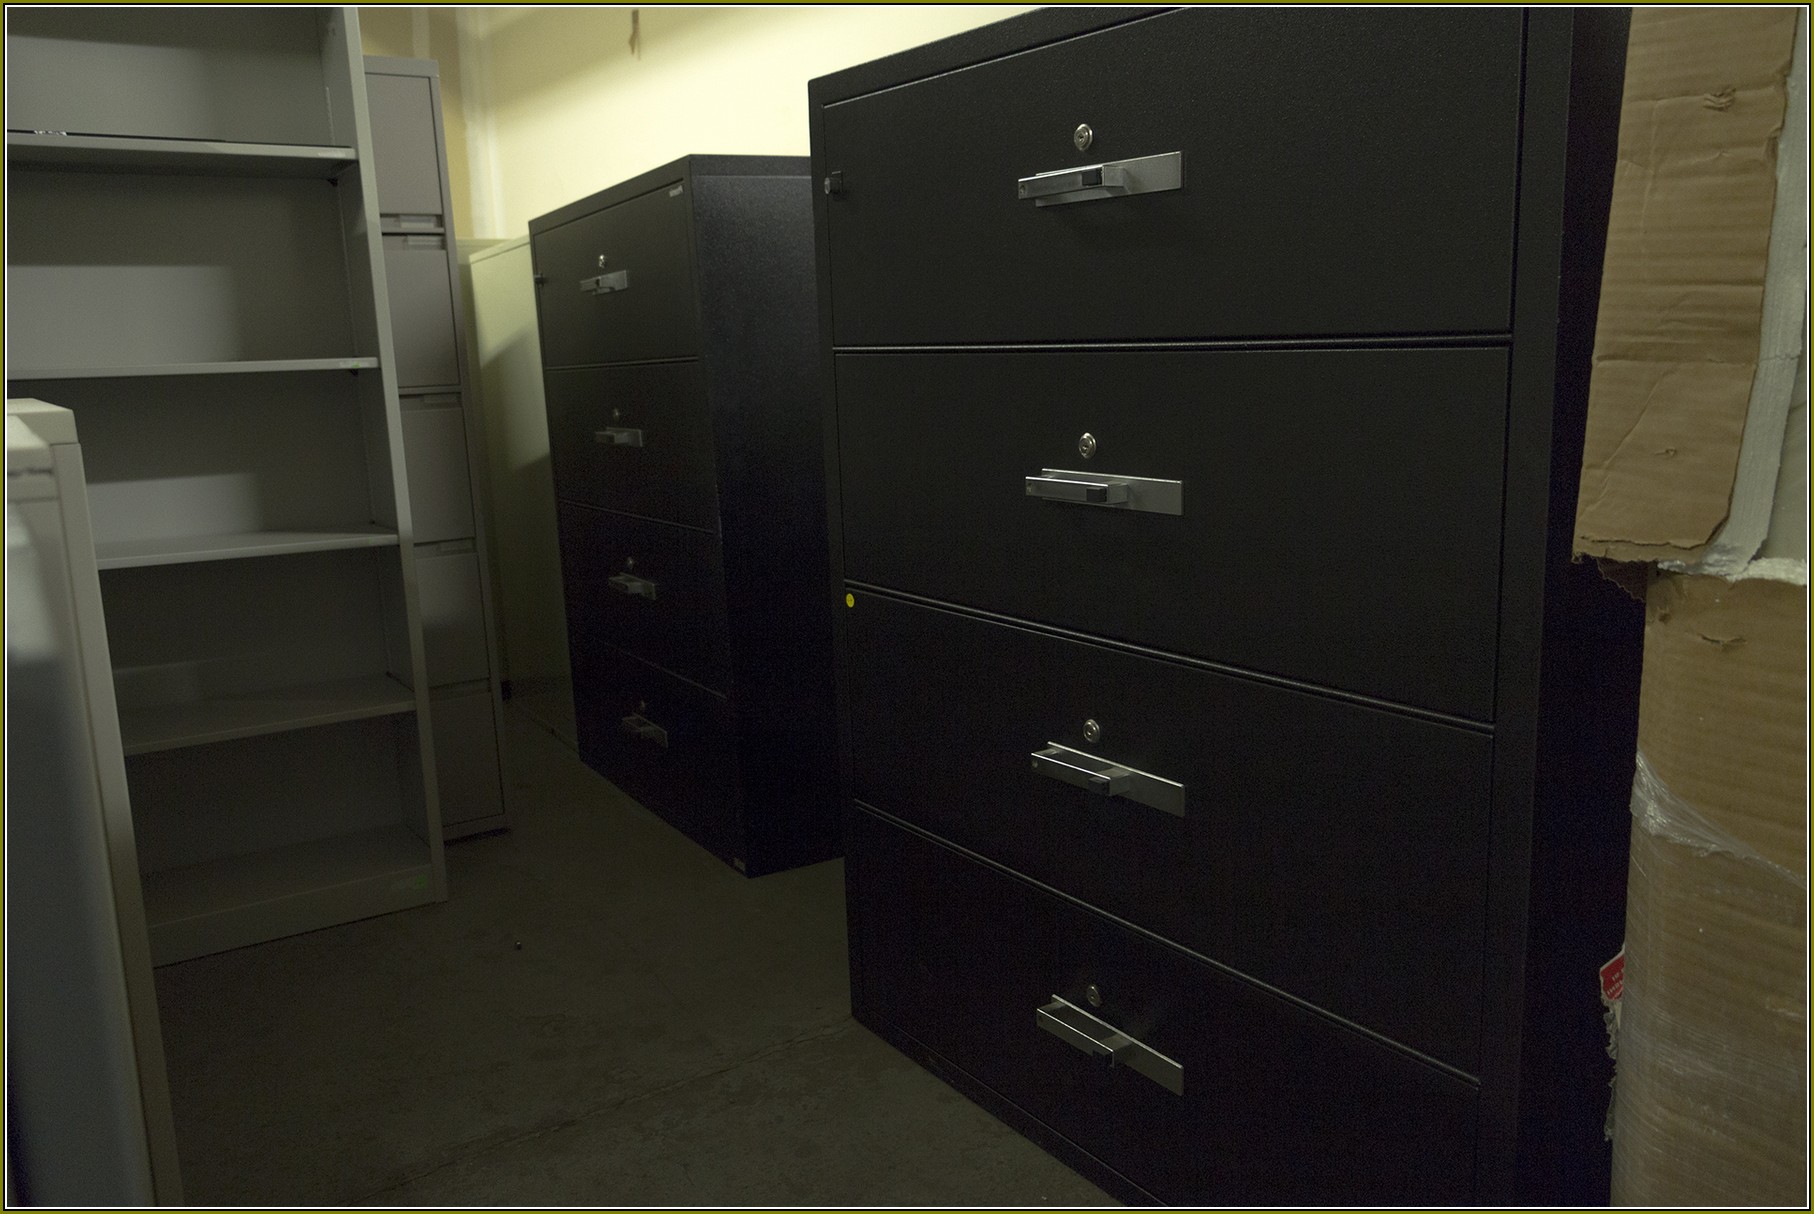 4 Drawer Fireproof File Cabinet